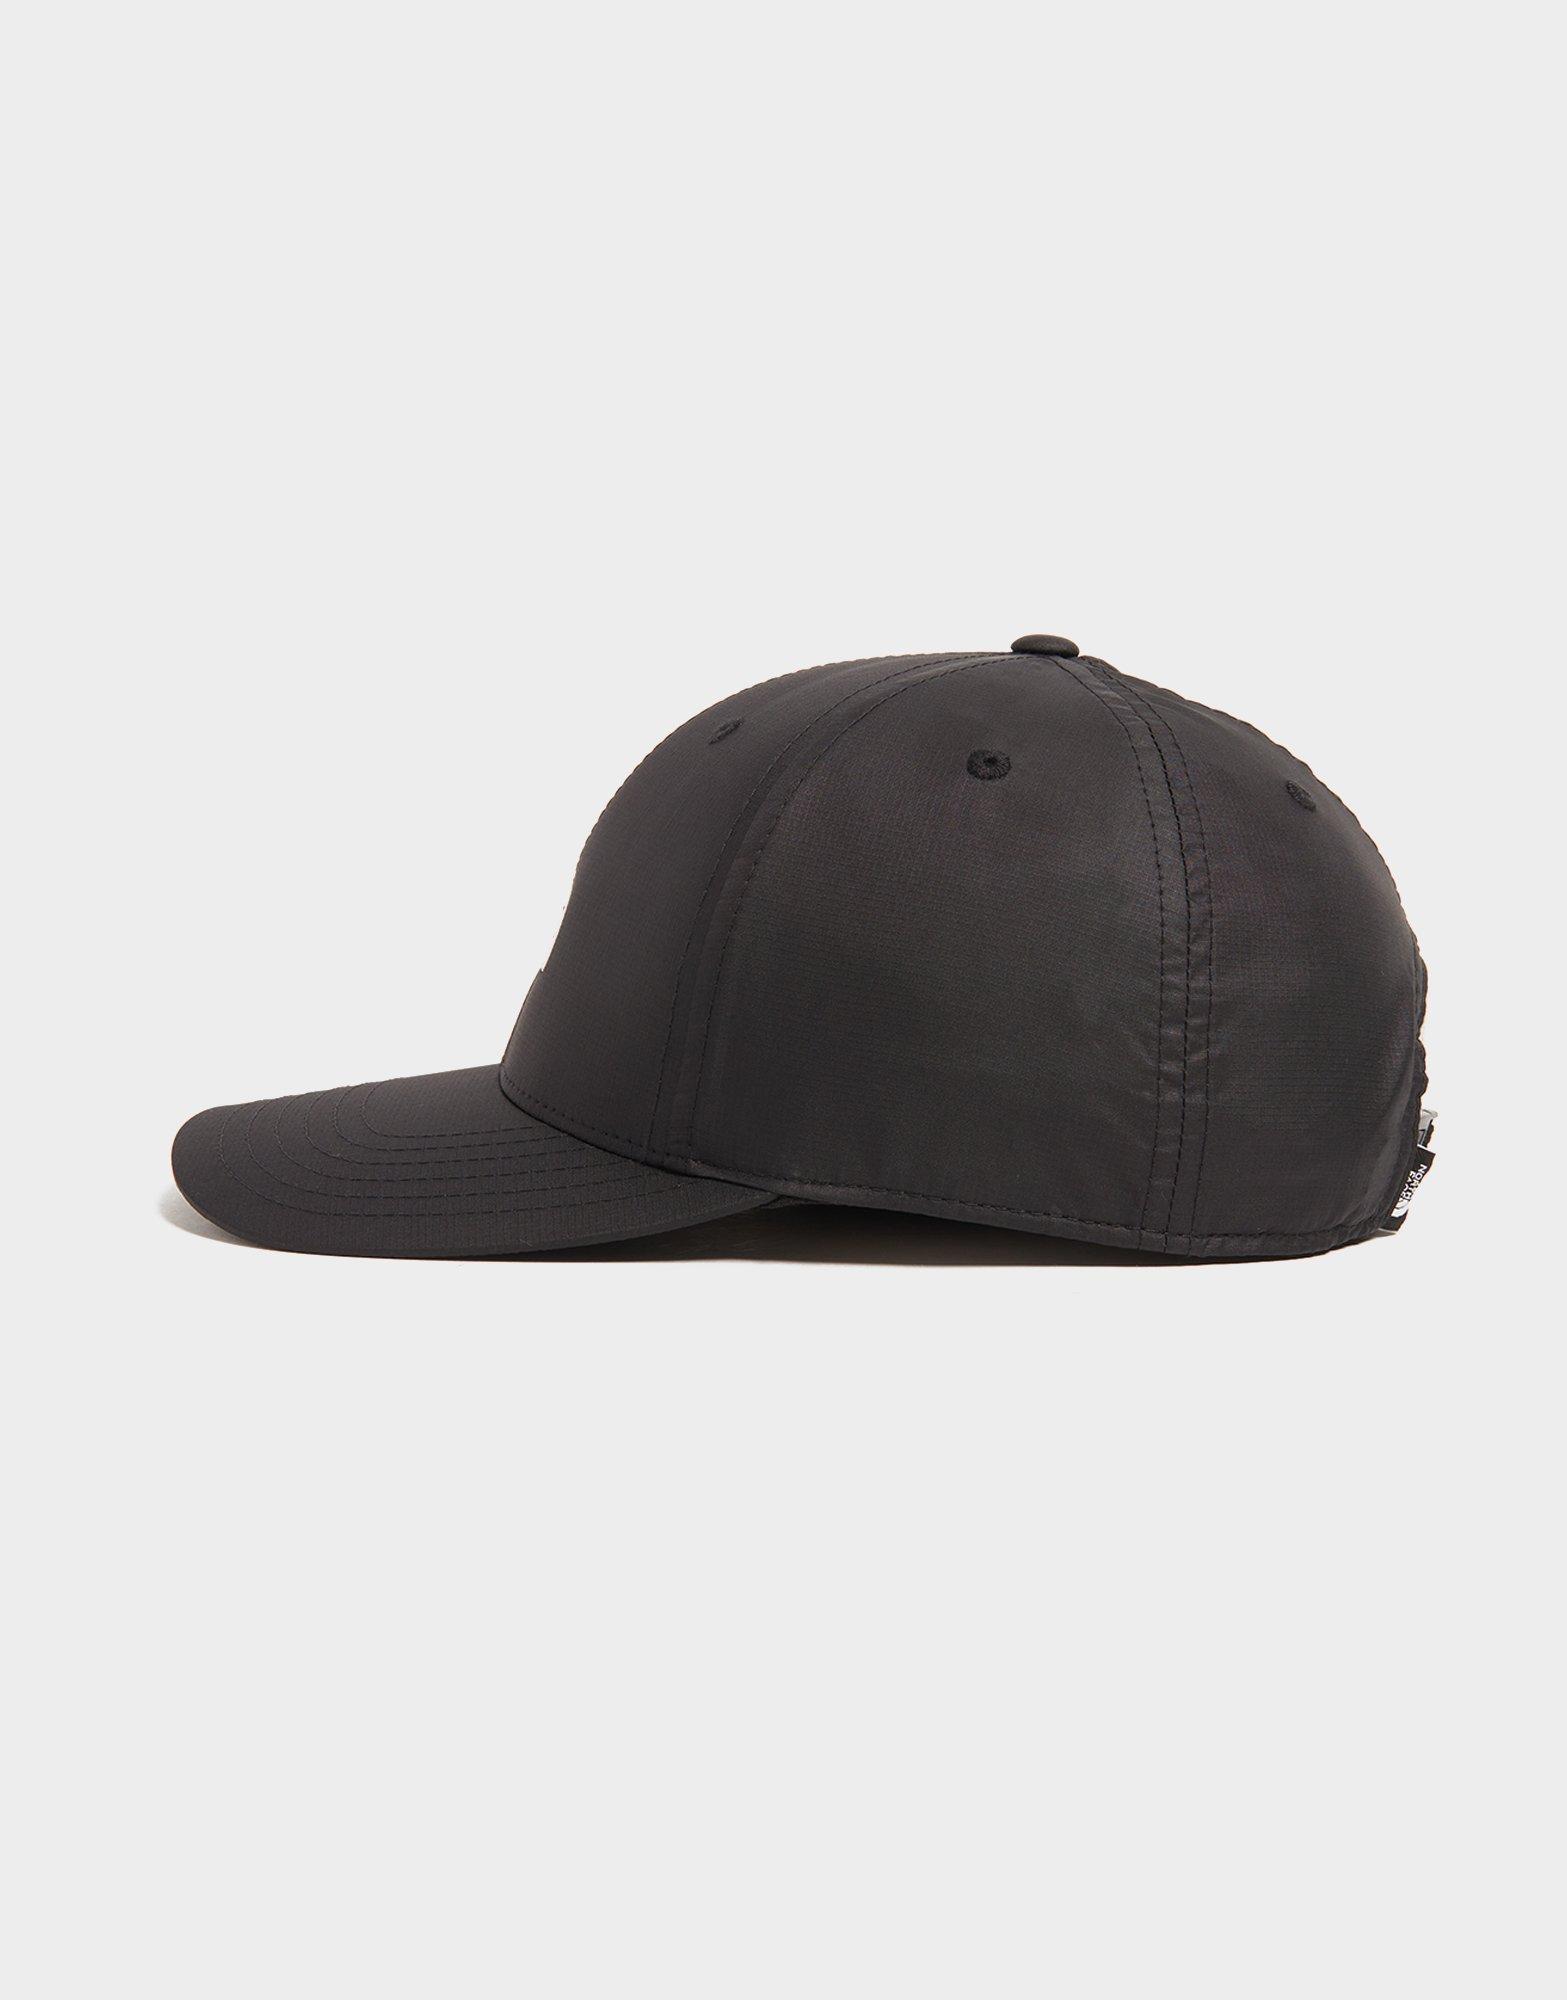 north face hat jd